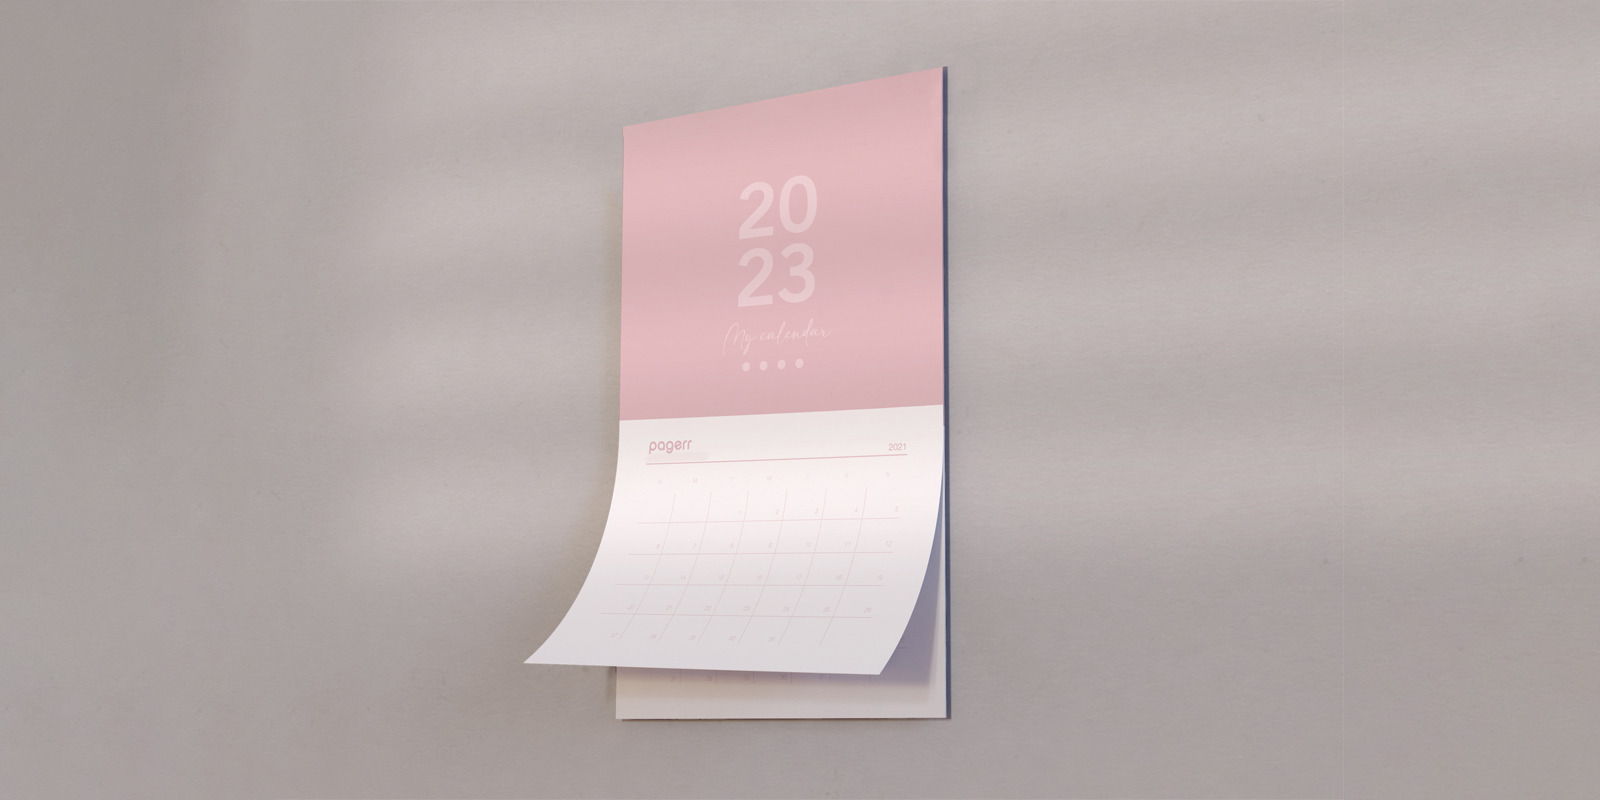 Magnetic calendars in Melbourne - Print with Pagerr